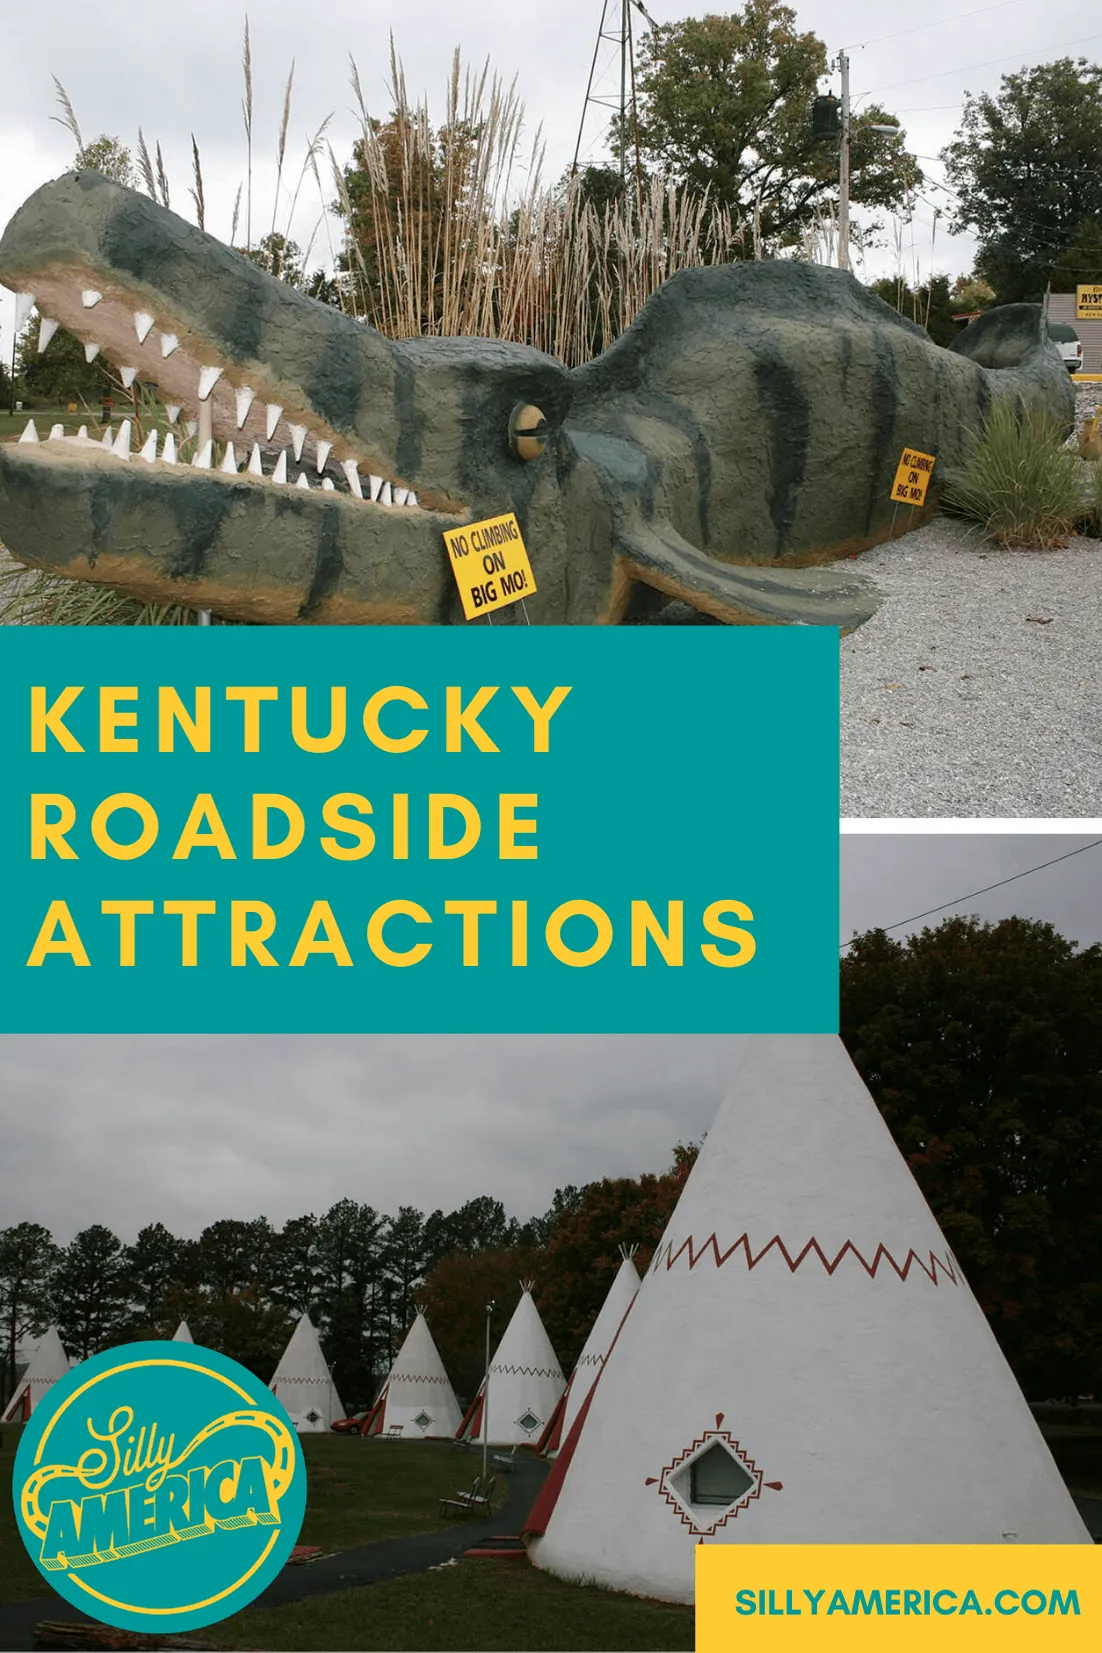 The best Kentucky roadside attractions to visit on a Kentucky road trip. Add these roadside oddities to your travel bucket list, itinerary, or route map! Weird roadside attractions and fun road trip stops for kids and adults. #KentuckyRoadsideAttractions #KentuckyRoadsideAttraction #RoadsideAttractions #RoadsideAttraction #RoadTrip #KentuckyRoadTrip #KentuckyRoadTripBucketLists #KentuckyRoadTripIdeas #KentuckyBucketList #KentuckyPlacesToVisit #WeirdRoadsideAttractions